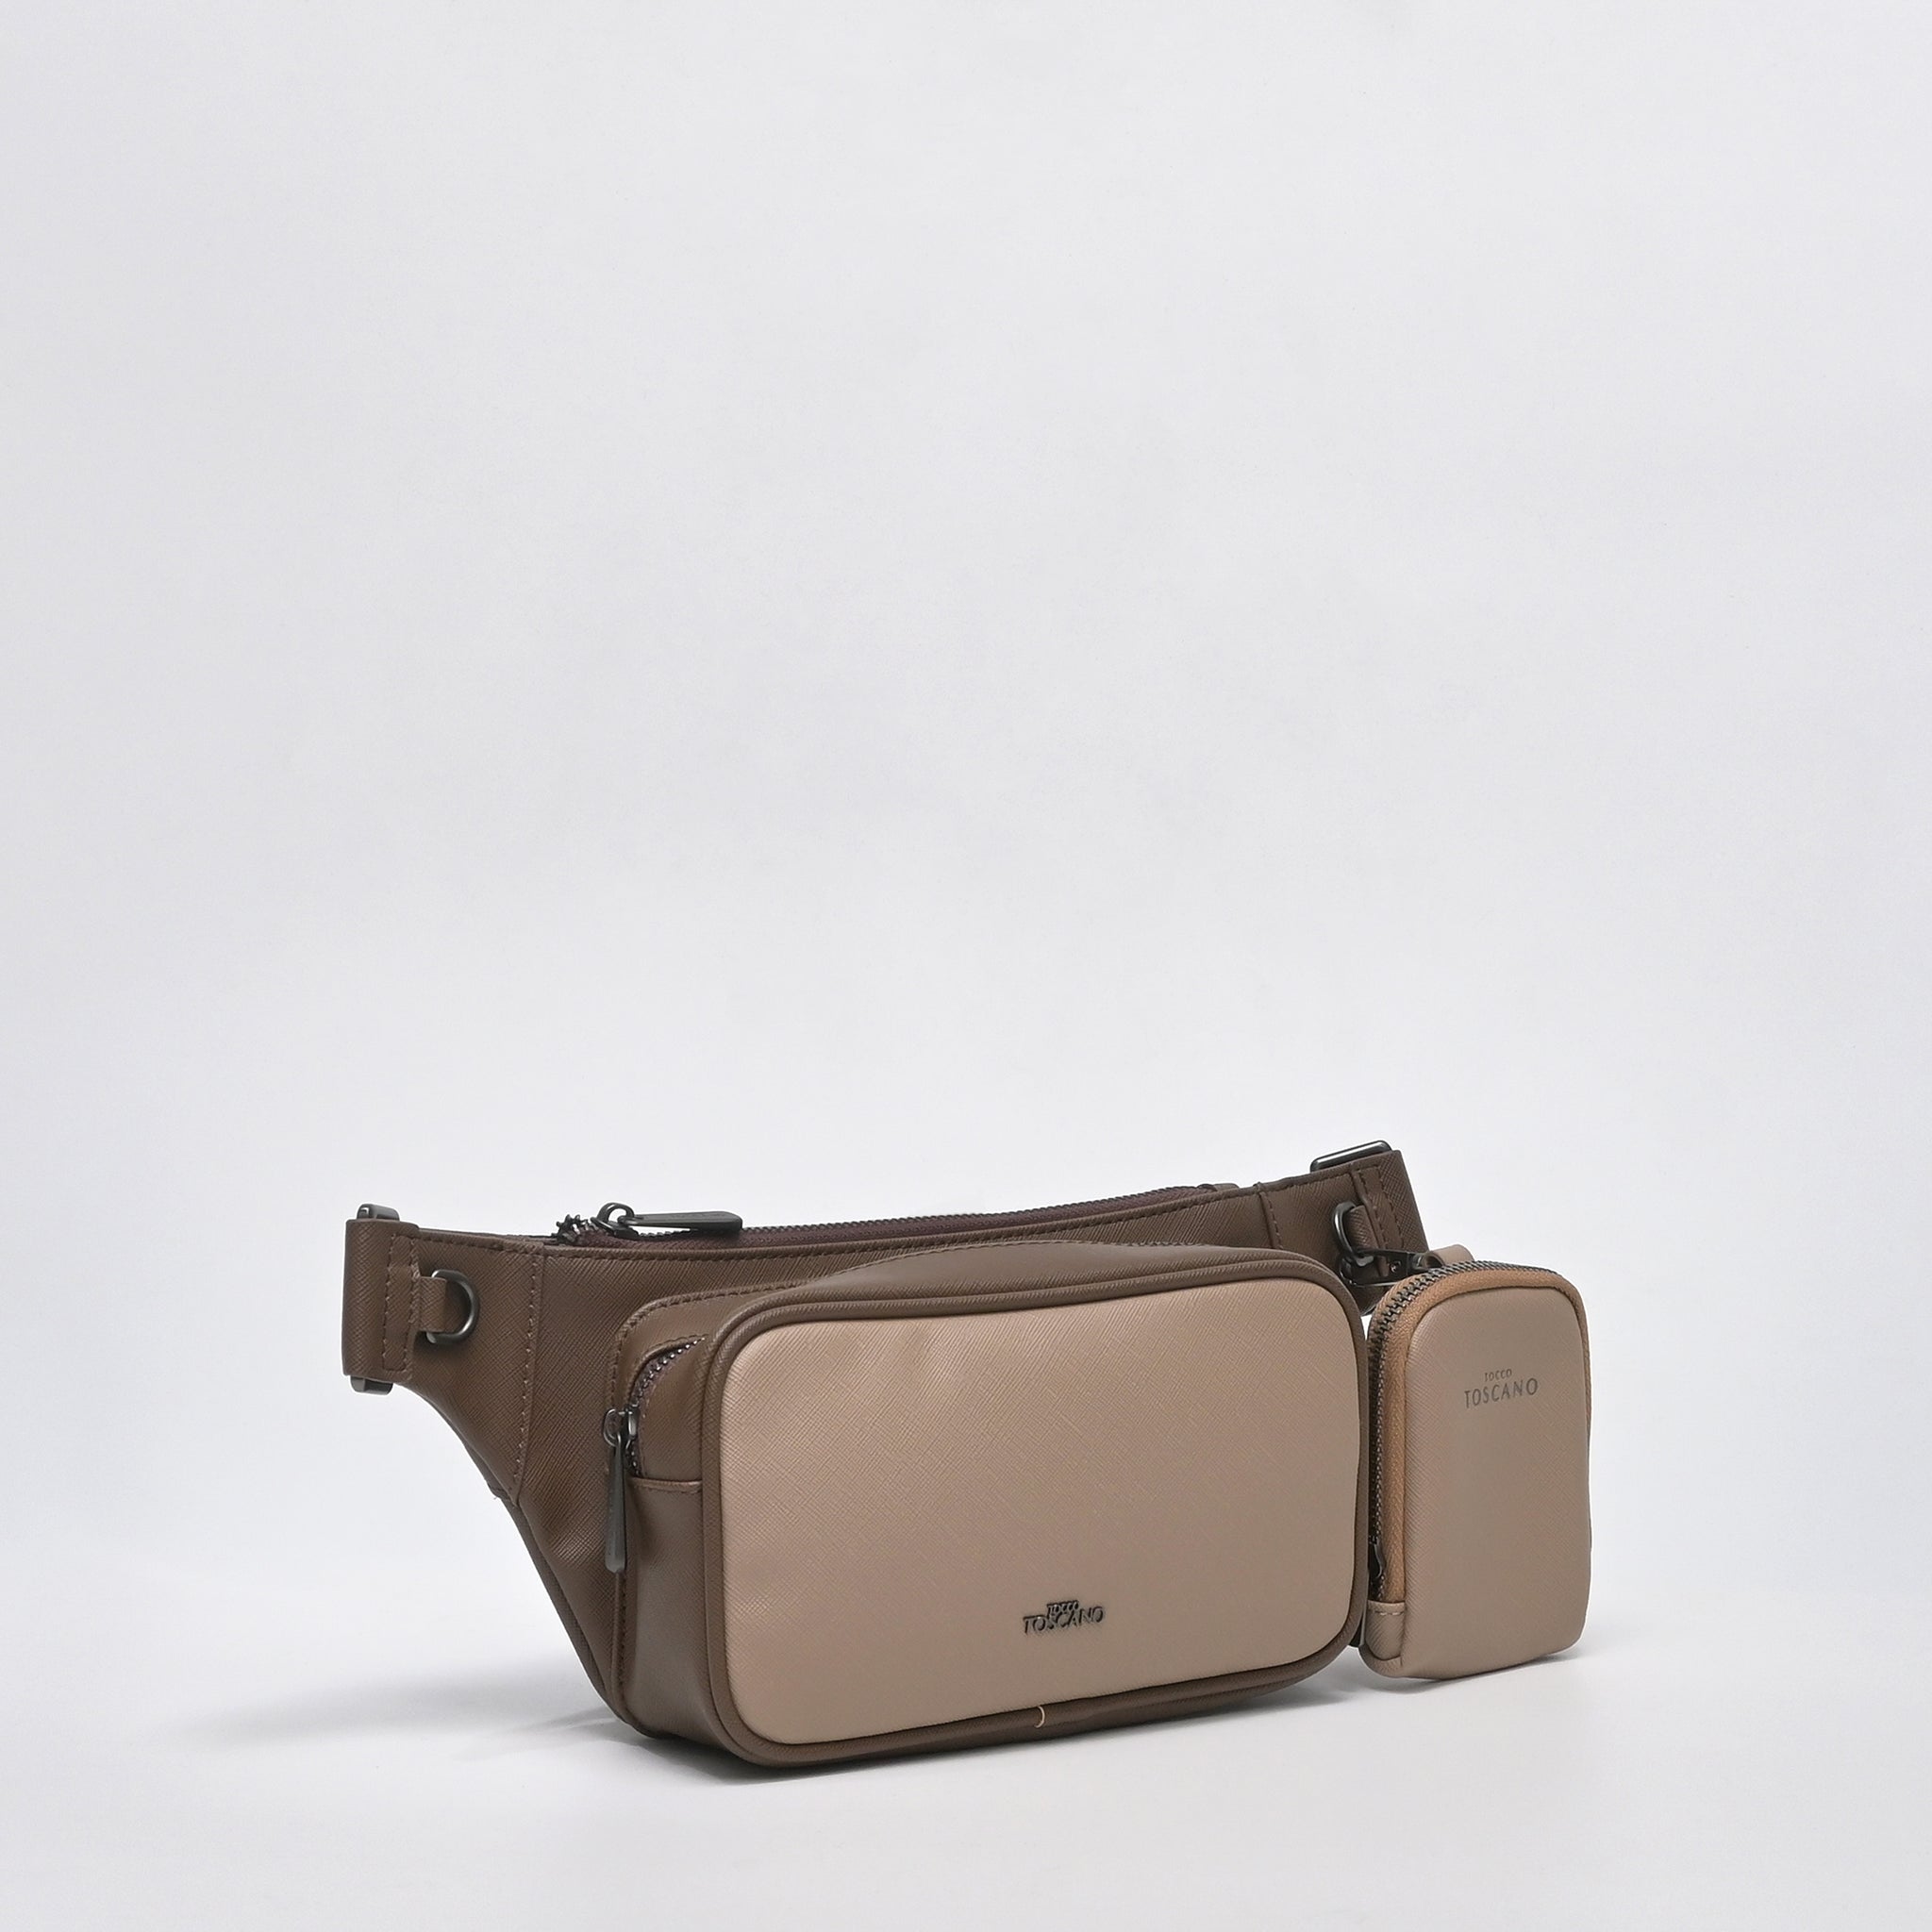 Camel Waist Bag With Small Key Pouch - TGEB1223PN3MK3